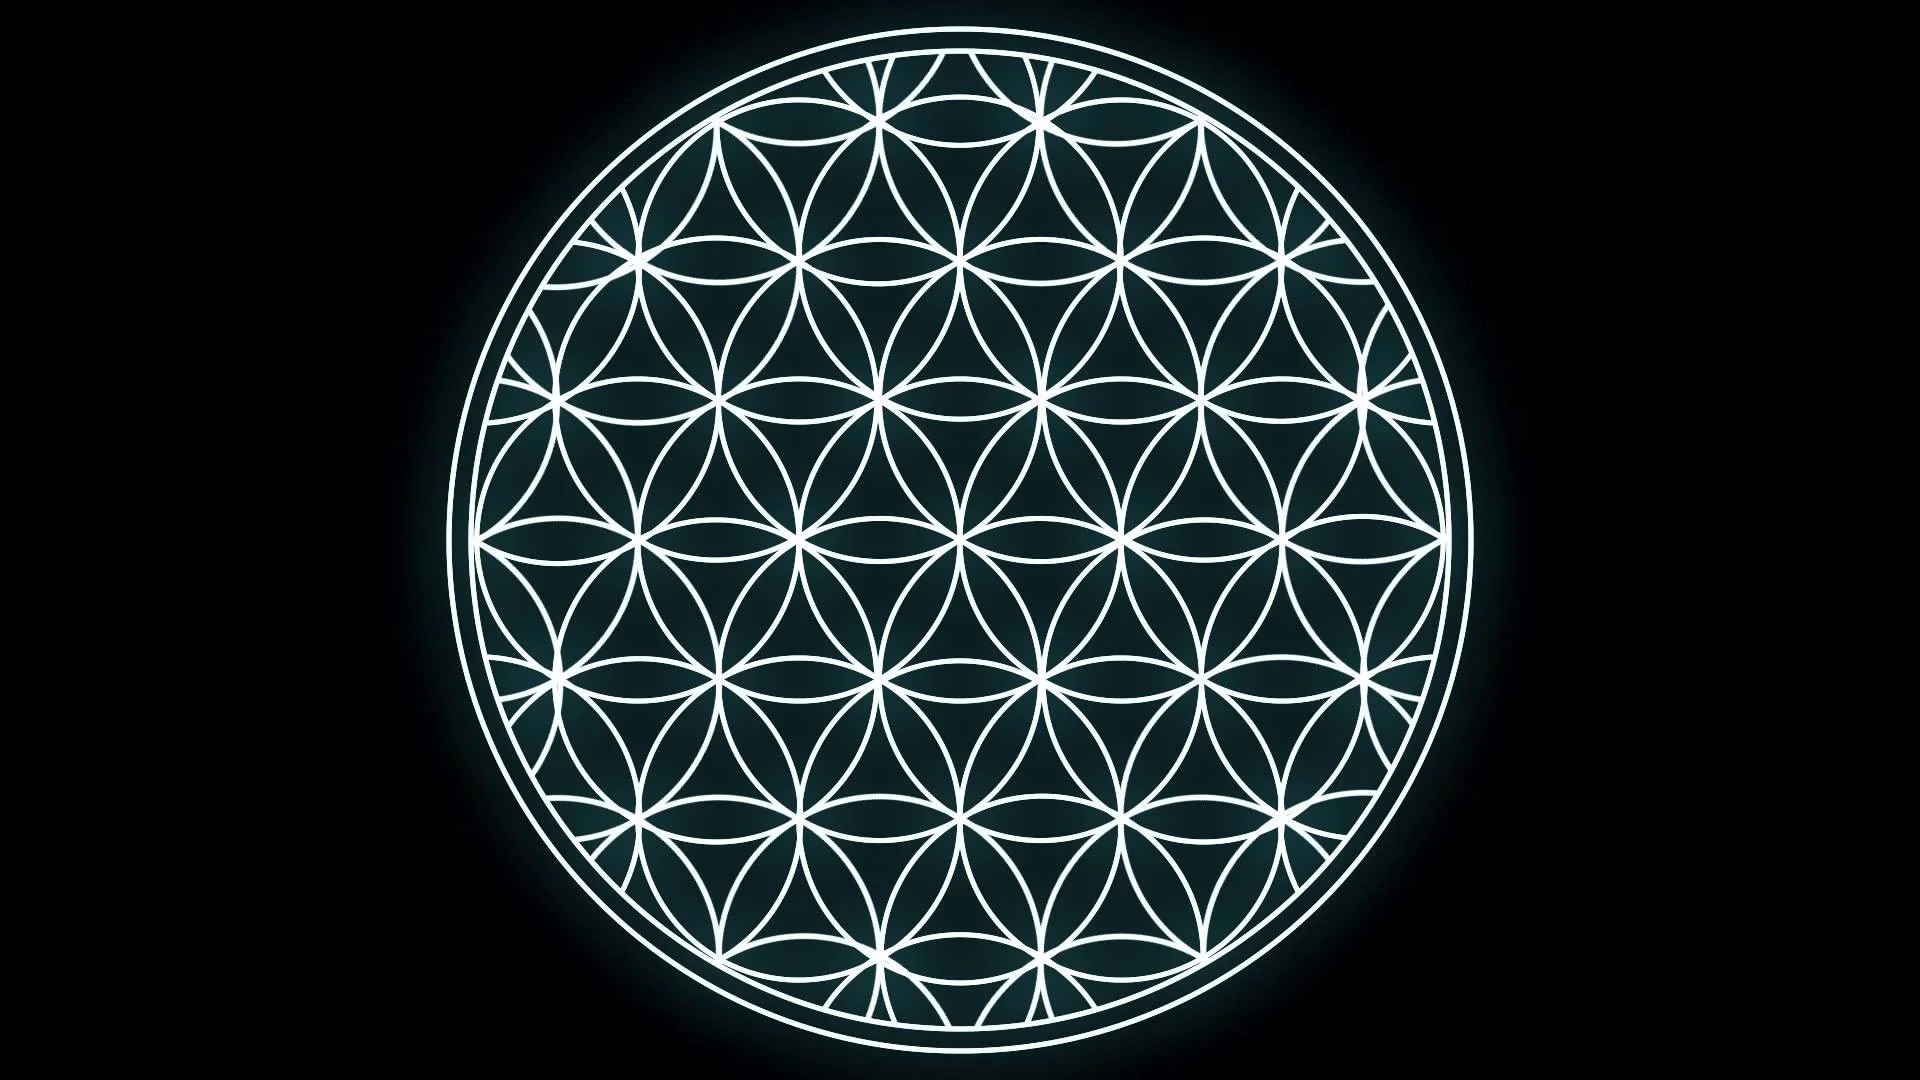 3. The Flower of Life